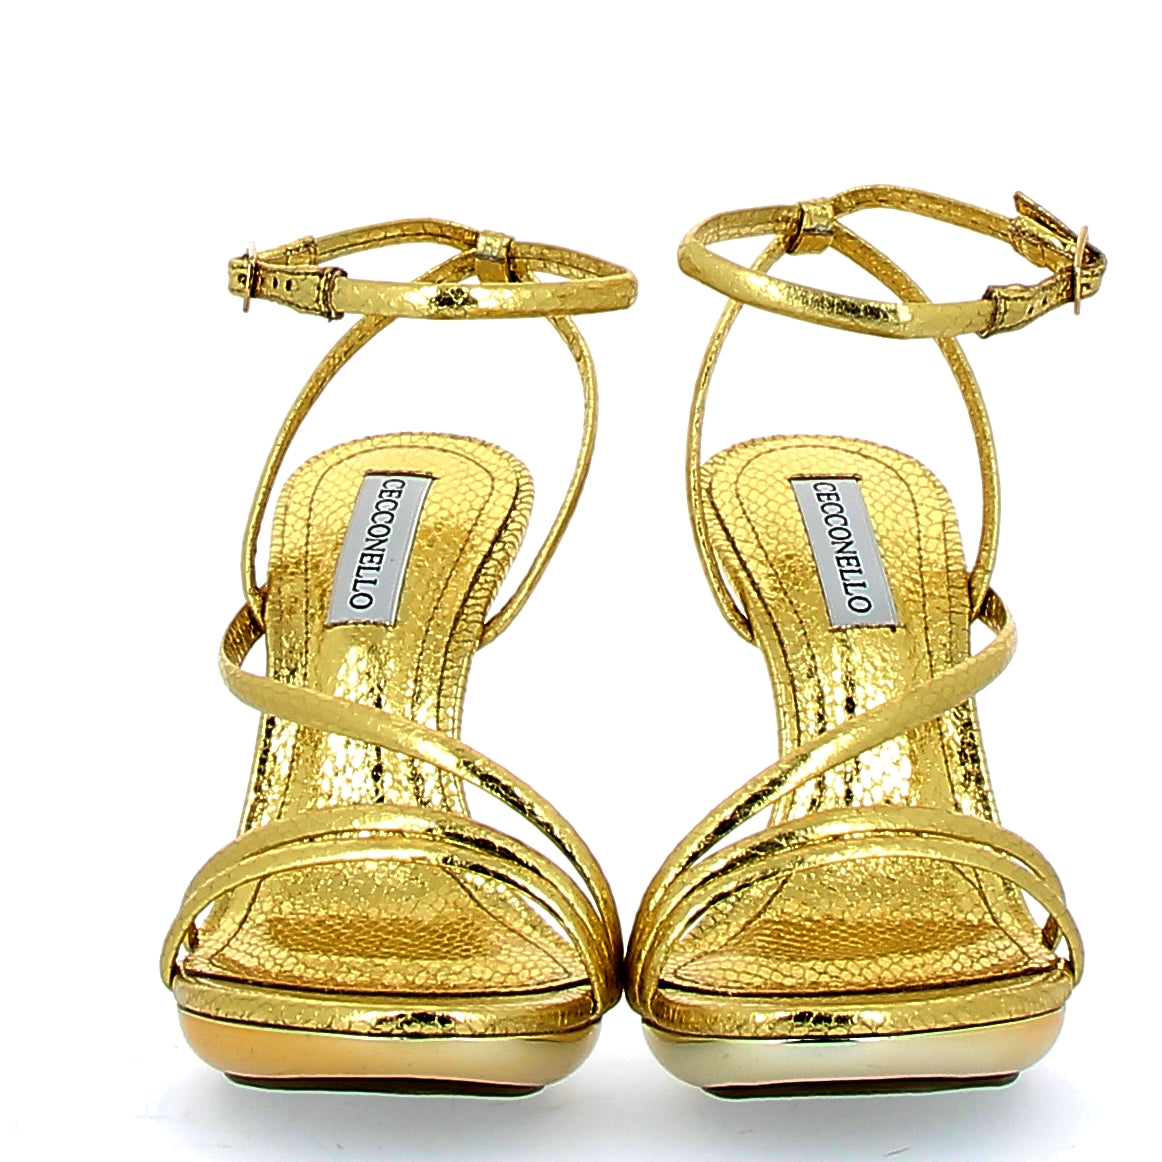 High gold sandal with snake finish on a golden background